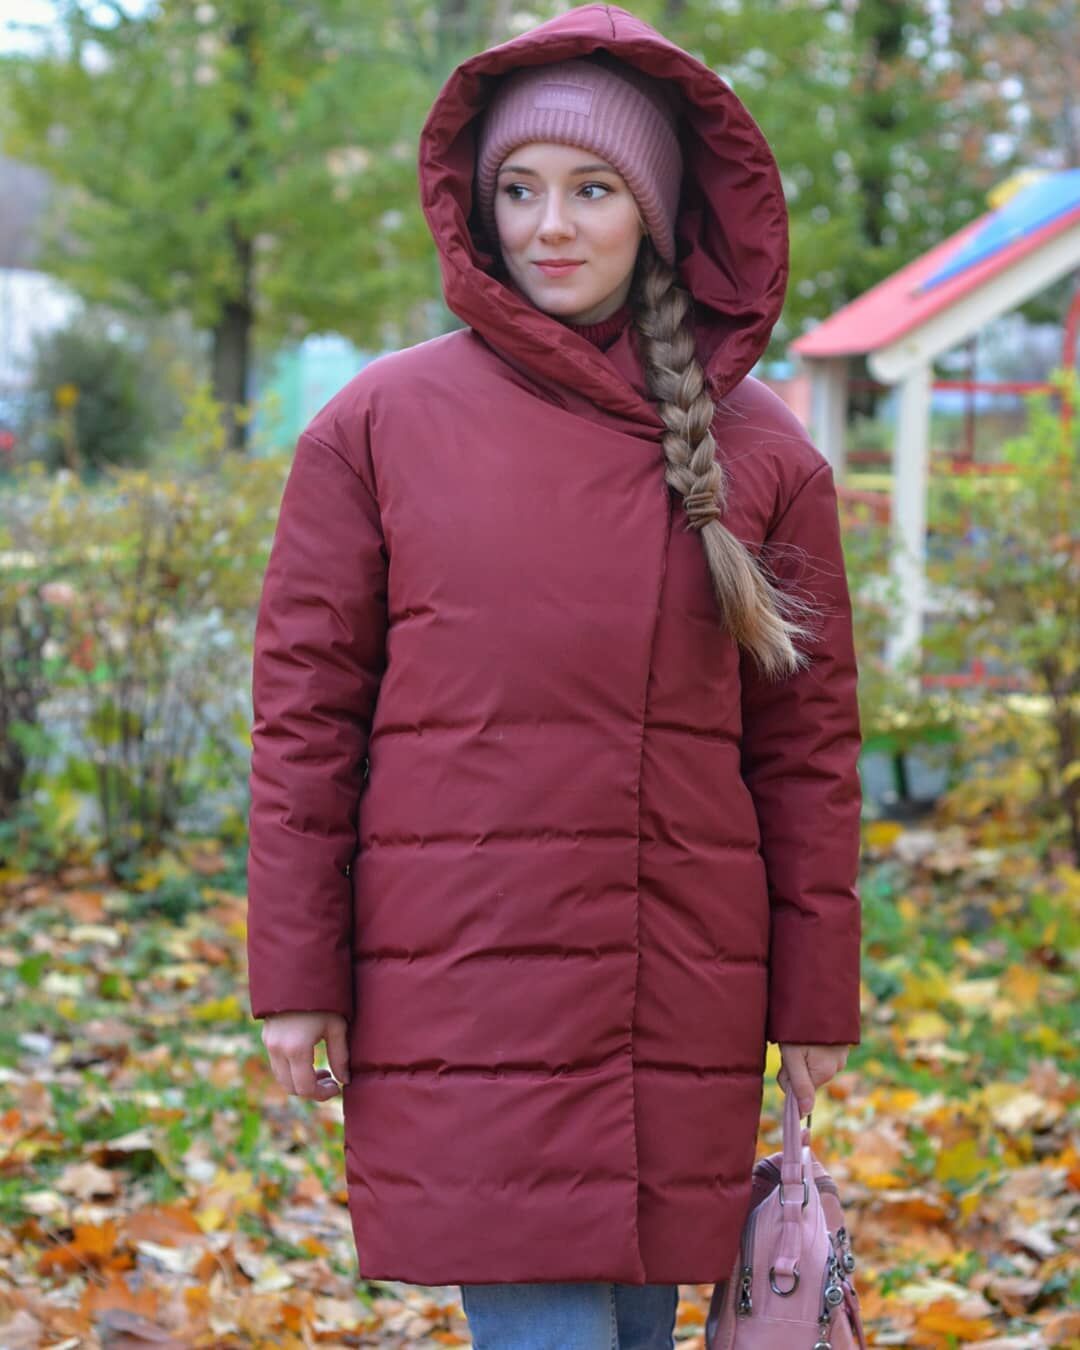 Insulated jacket, pattern №636 buy on-line